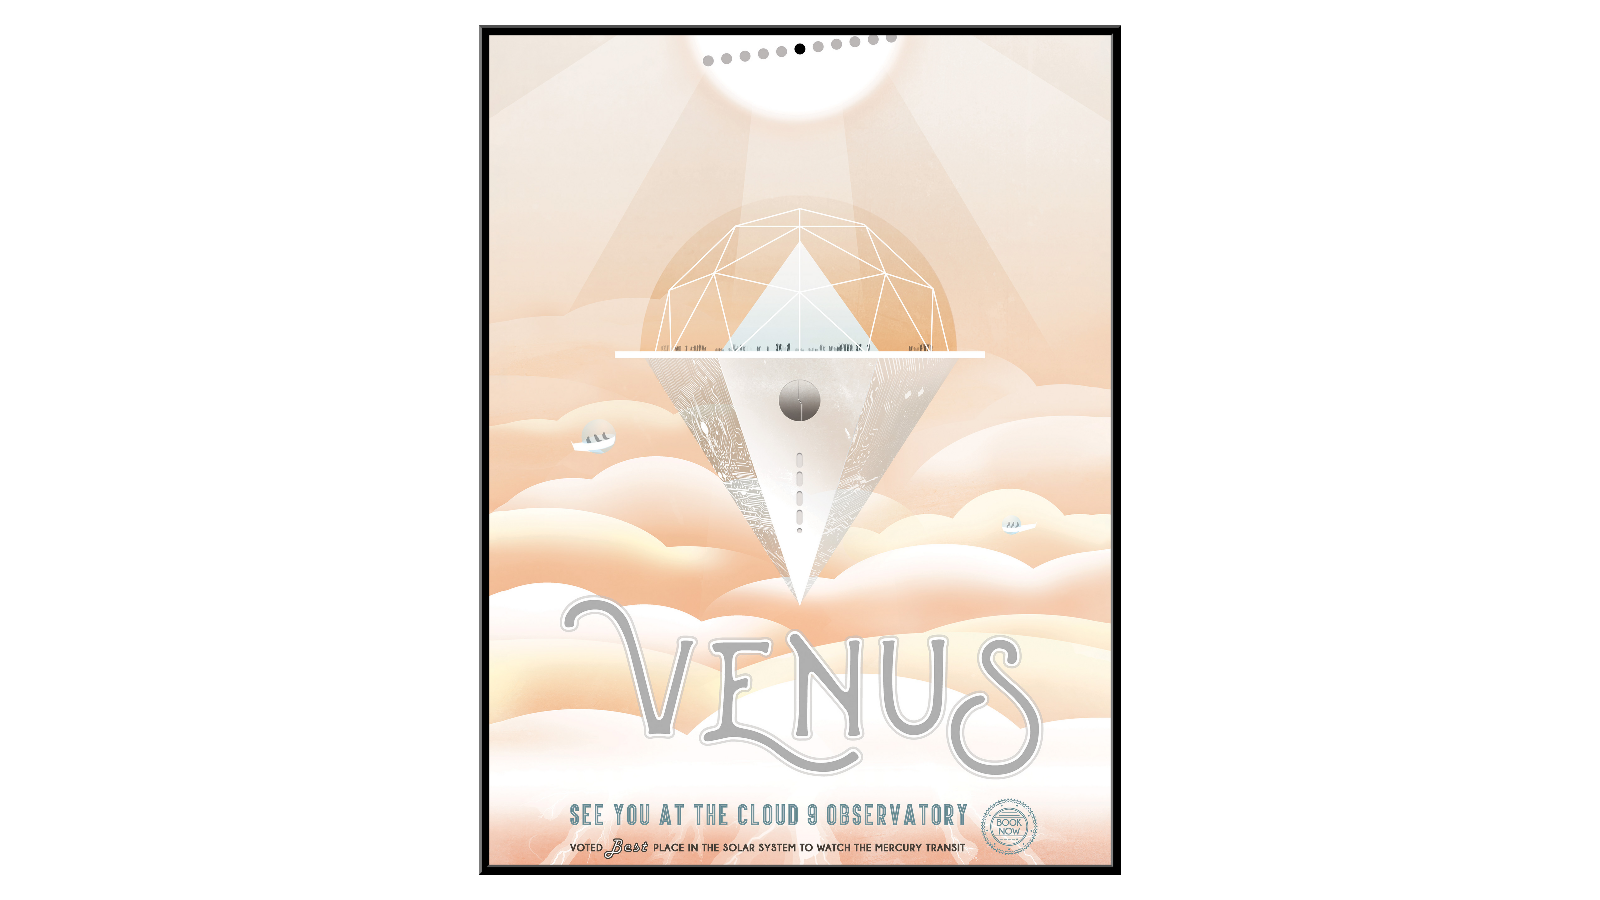 Wenus - See you at the cloud 9 observatory